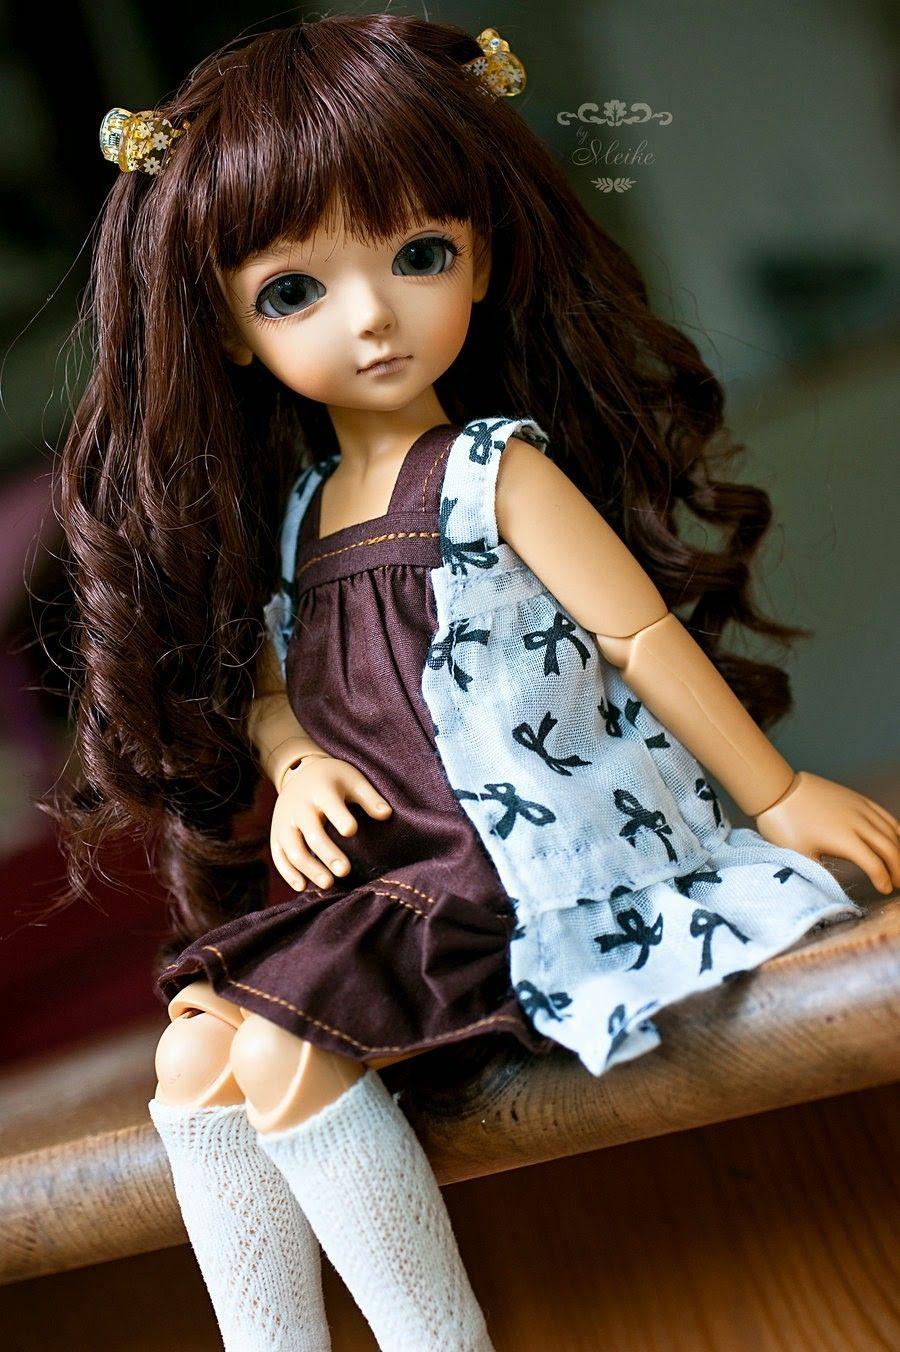 Very Cute Dolls Wallpapers For Facebook - Wallpaper Cave